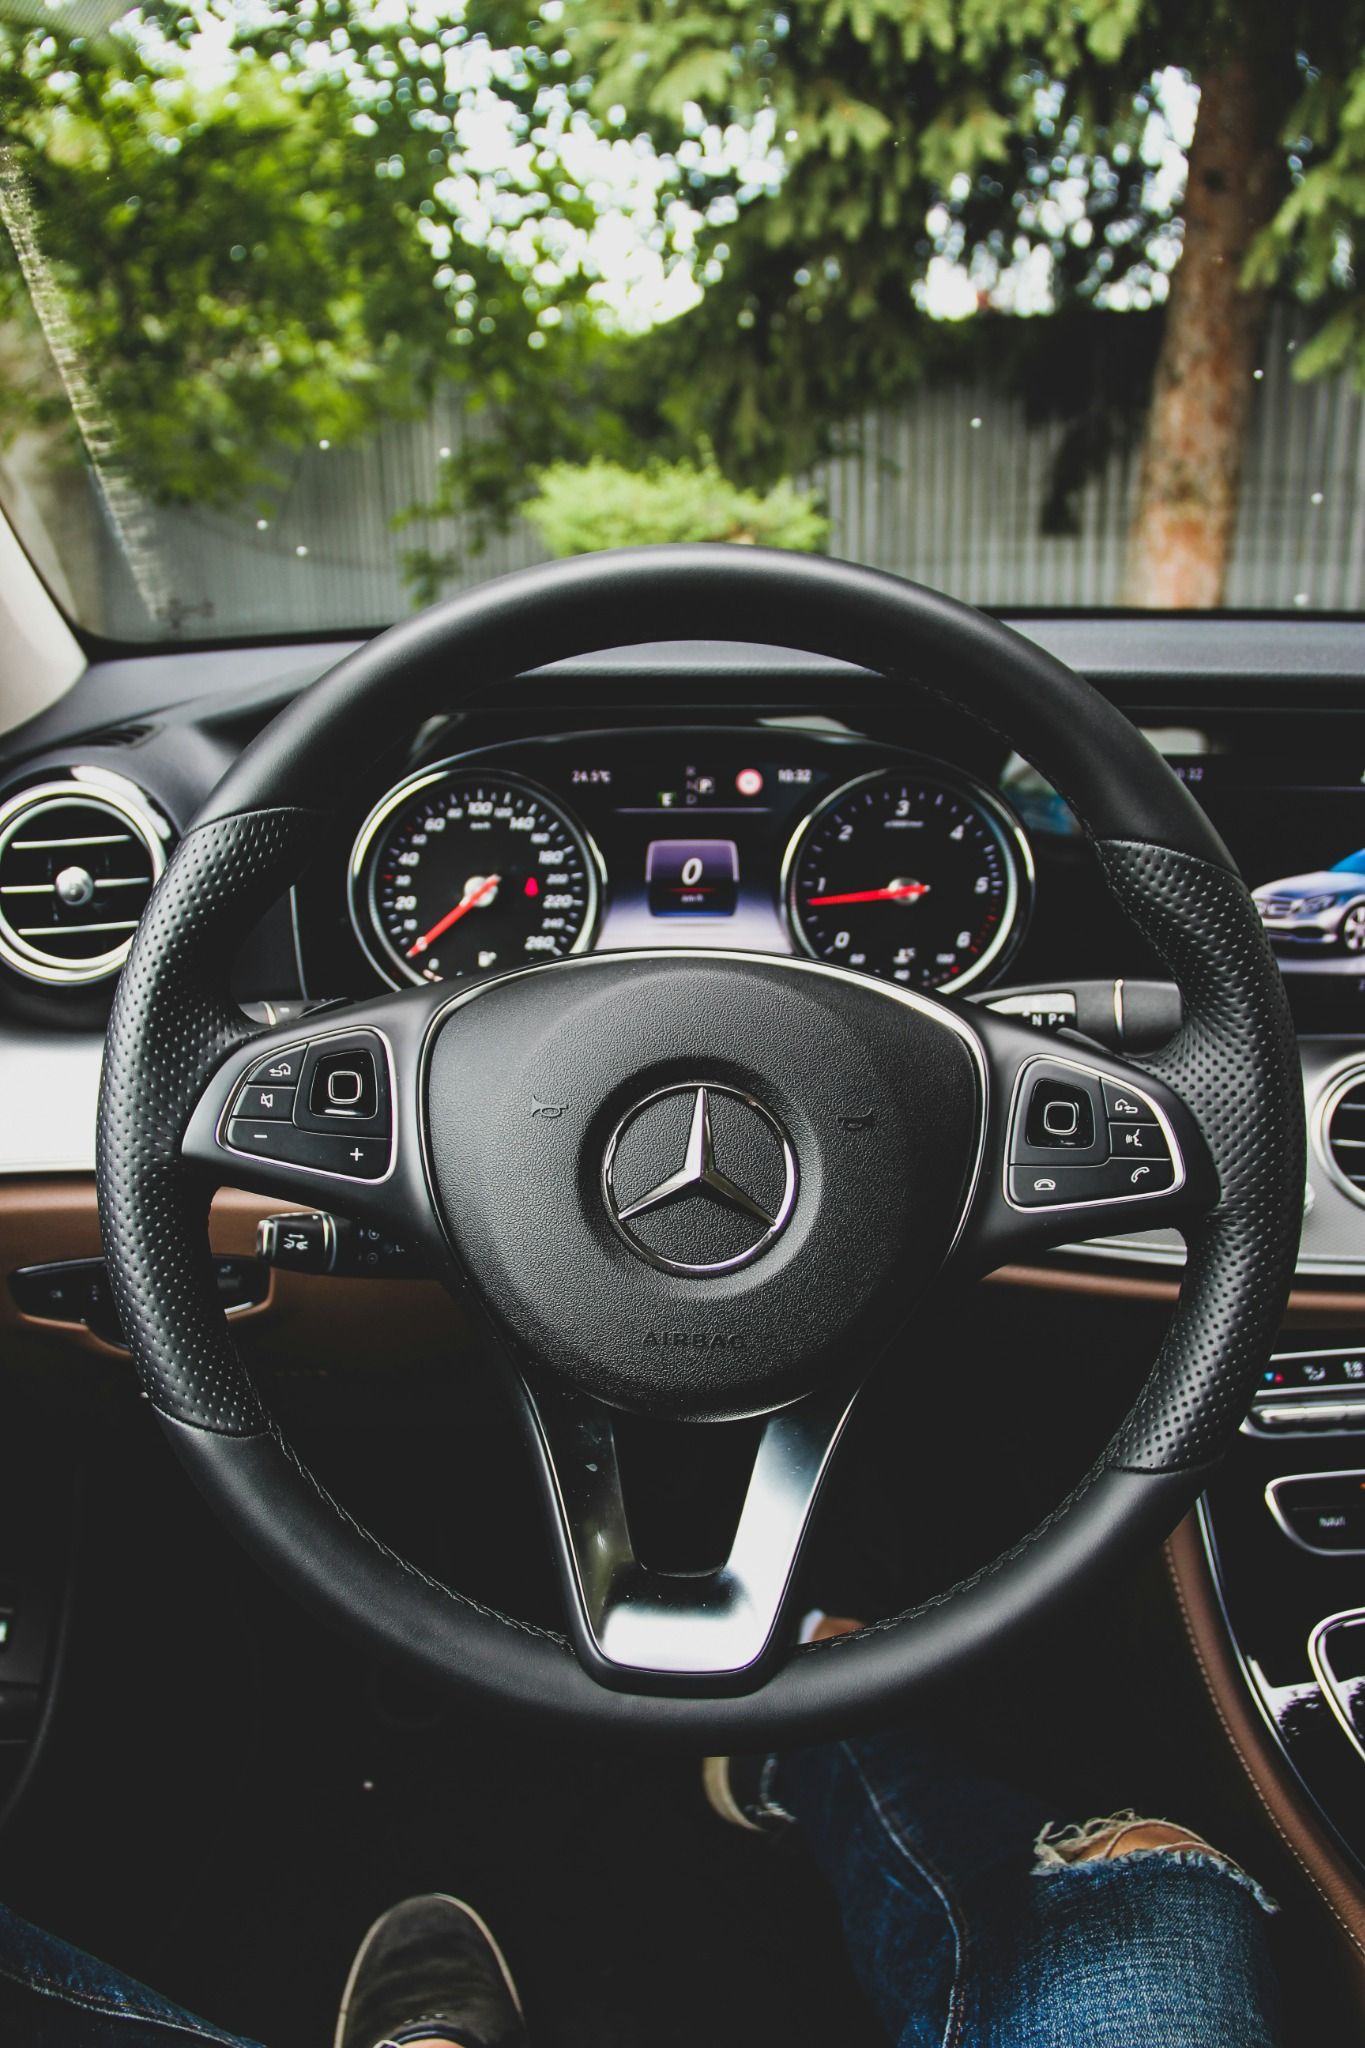 Close up of Mercedes-Benz steering wheel and dash